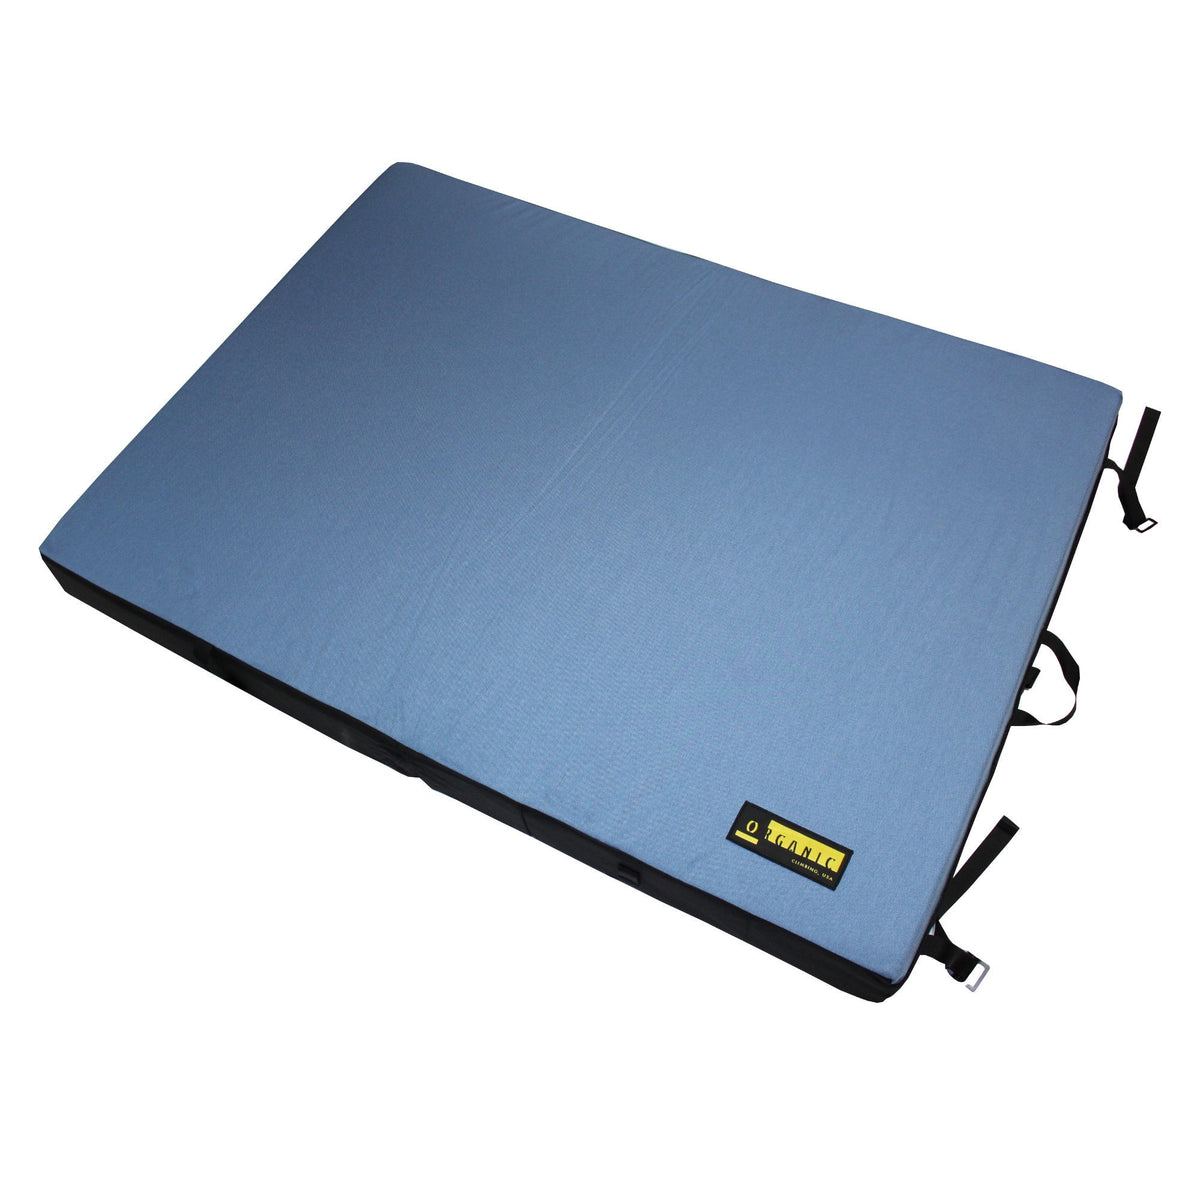 Organic Simple Pad, shown open laid flat in blue colour